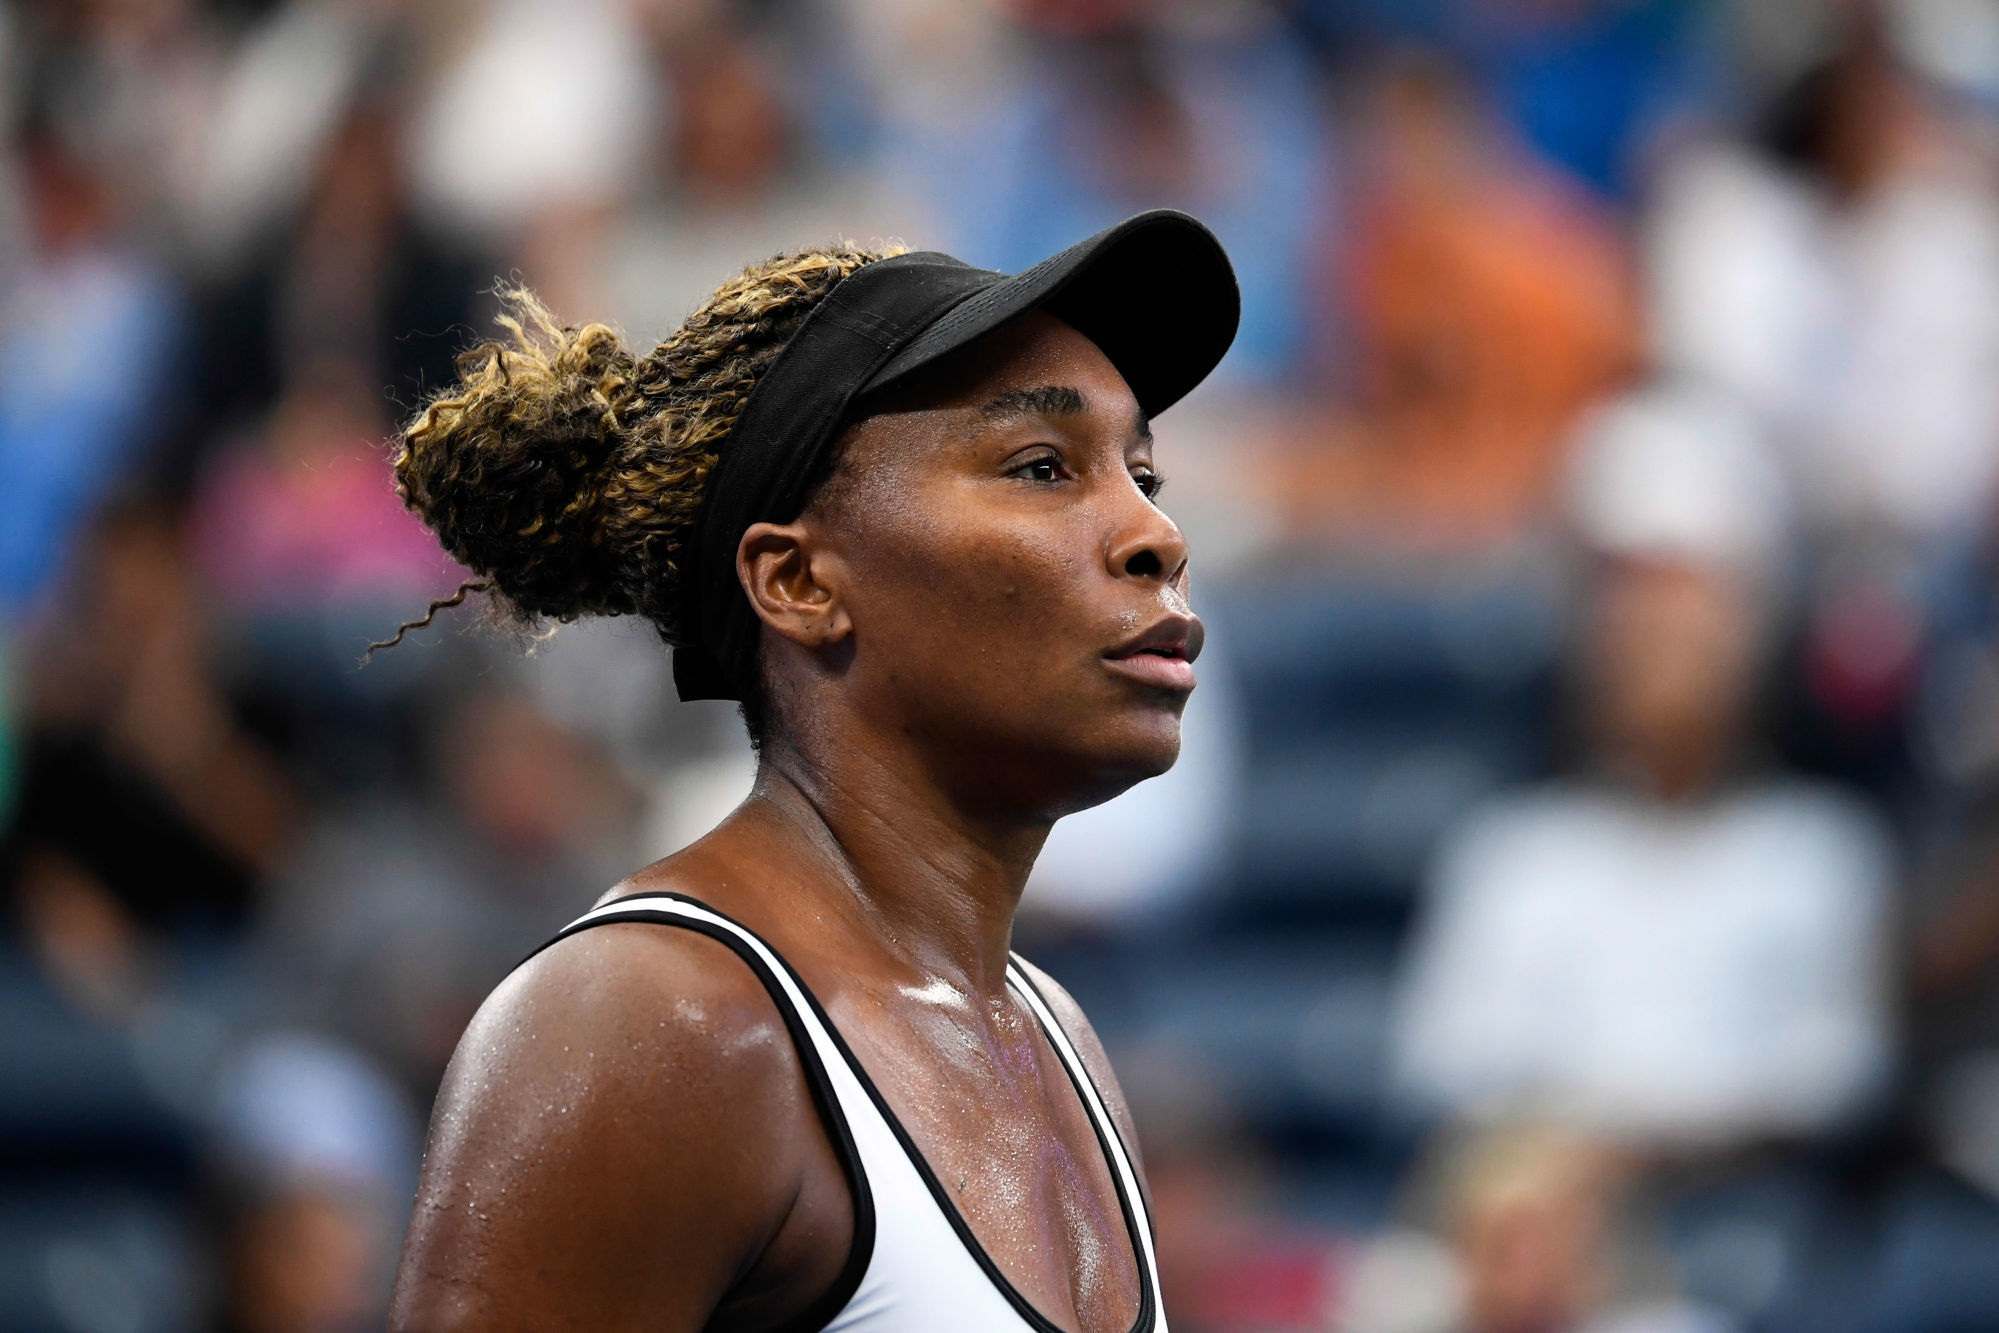 Aug 28, 2019; Flushing, NY, USA; Venus Williams of the United States during the second round on day three of the 2019 U.S. Open tennis tournament at USTA Billie Jean King National Tennis Center.
Photo: SUSA / Icon Sport *** Local Caption *** 27235642